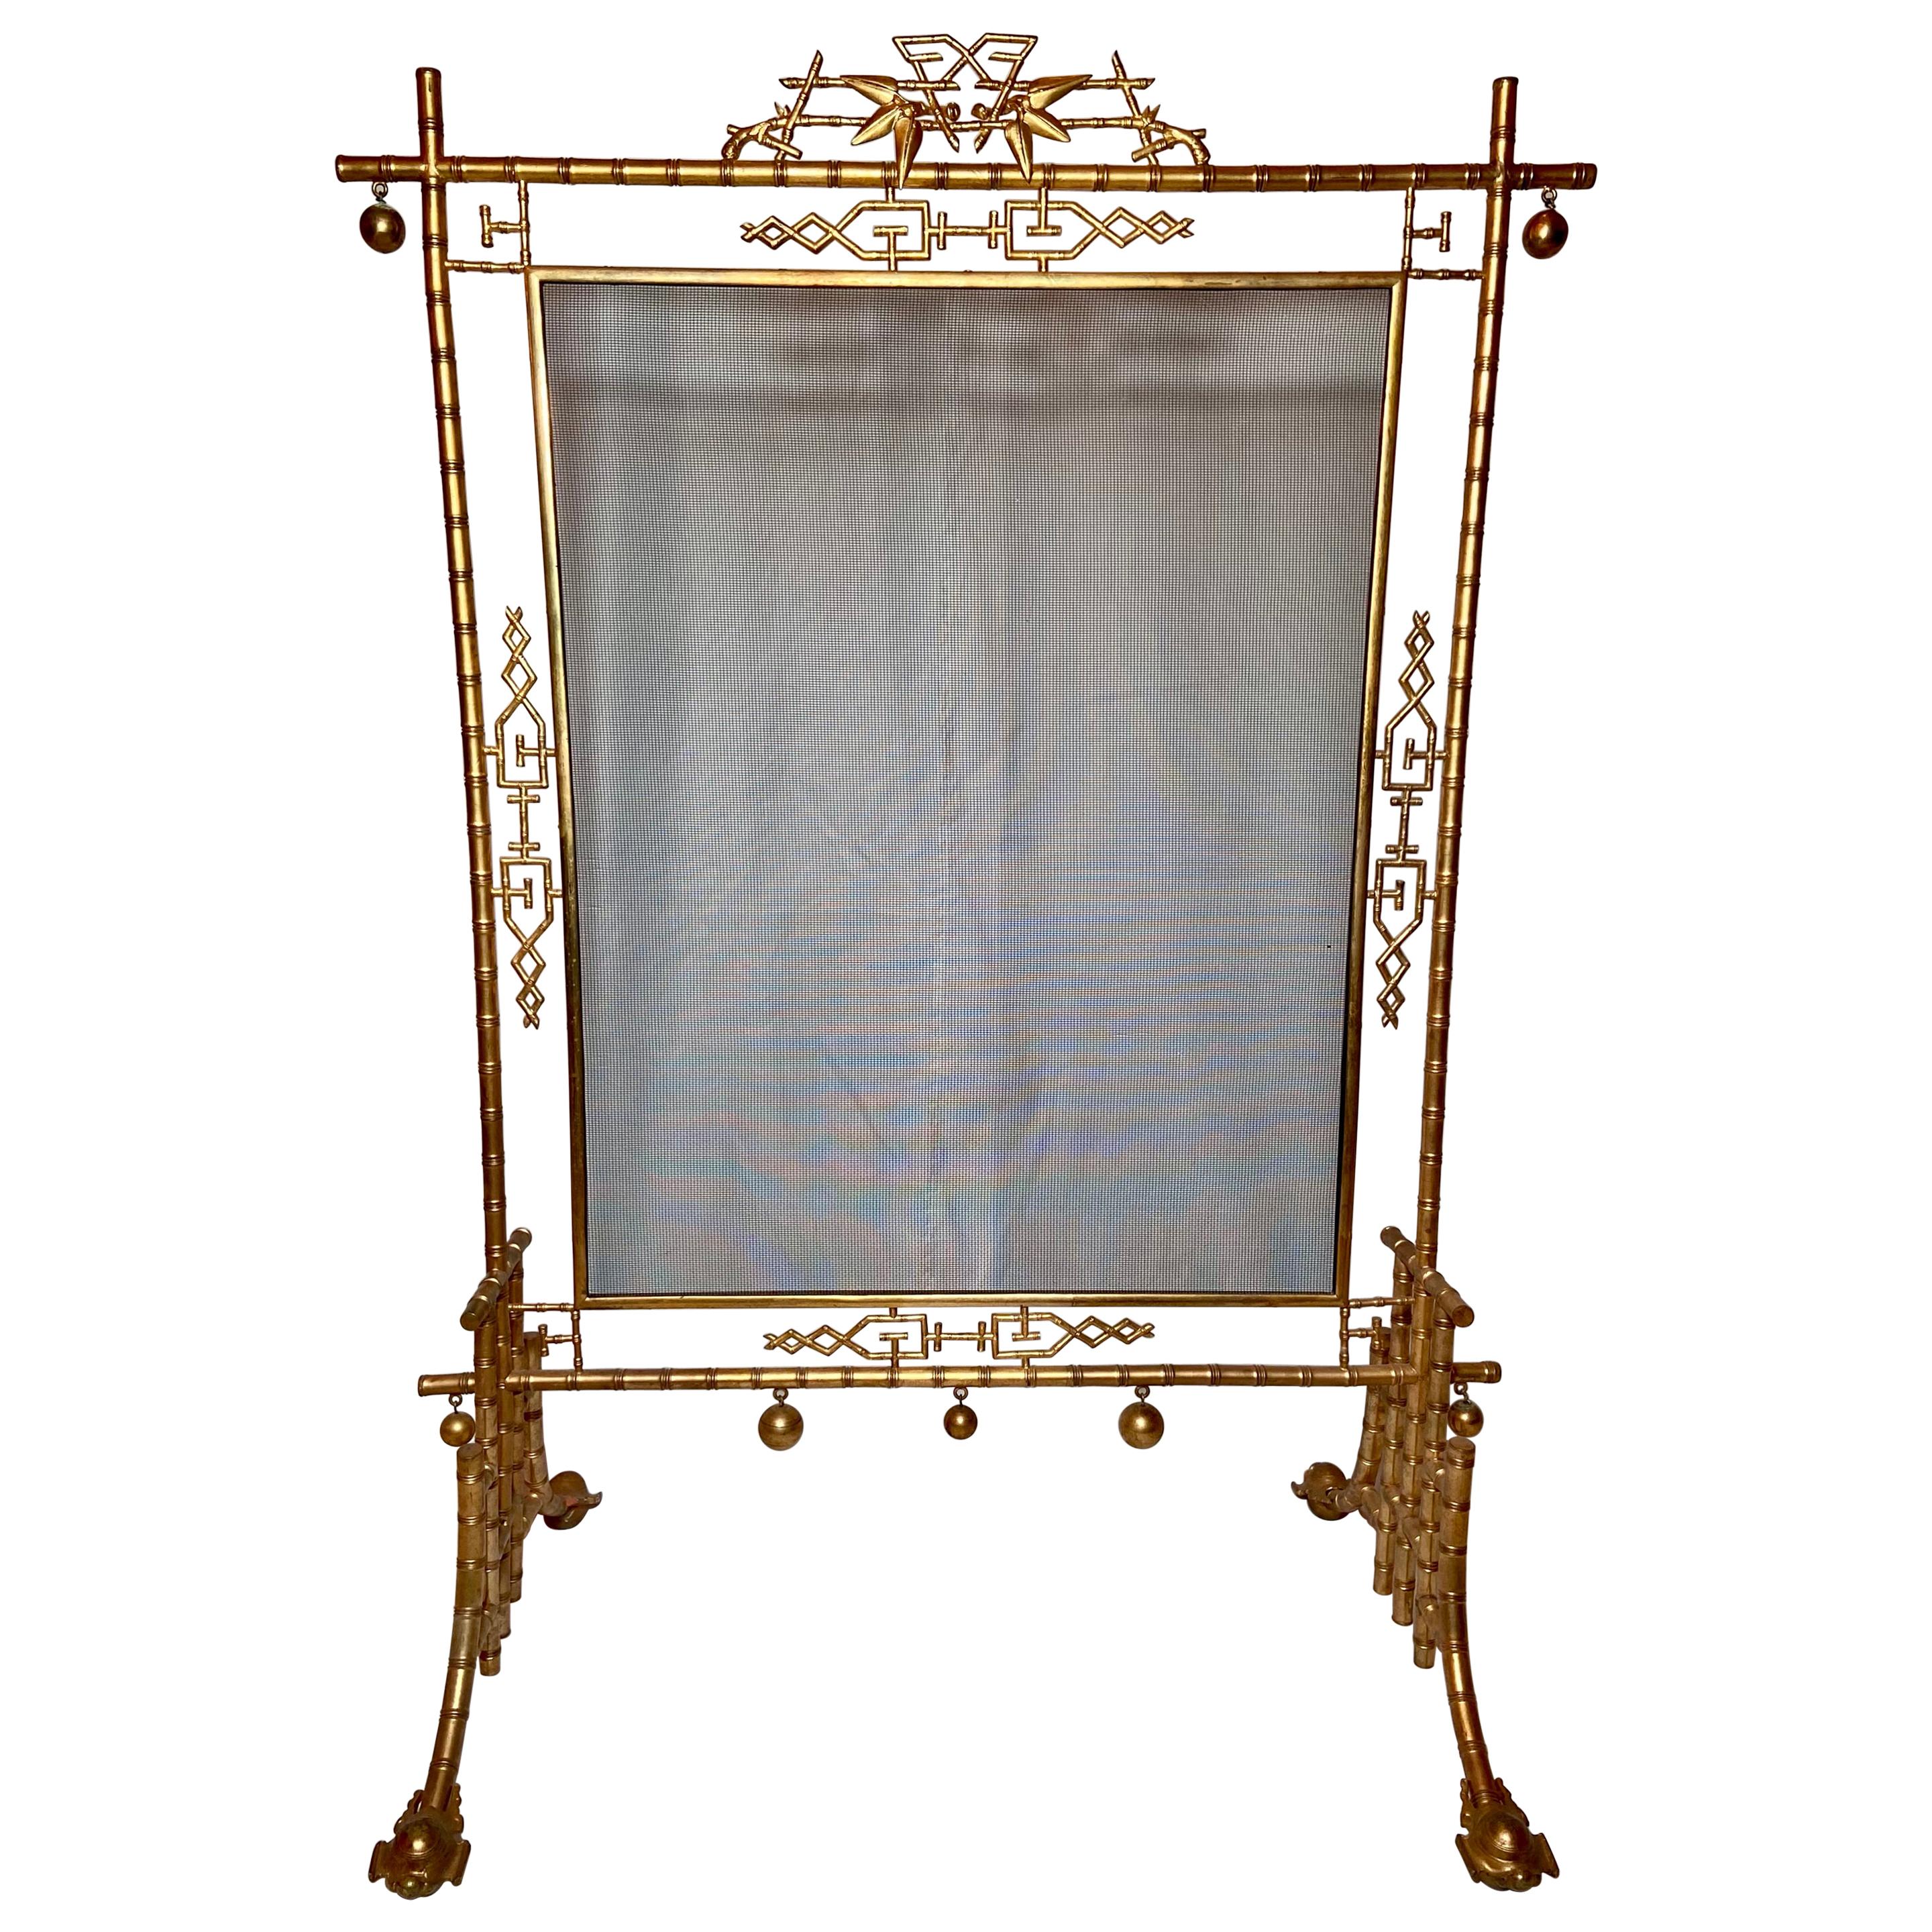 Antique French "Chinoiserie" Gold Bronze Fire Screen, Circa 1870-1880